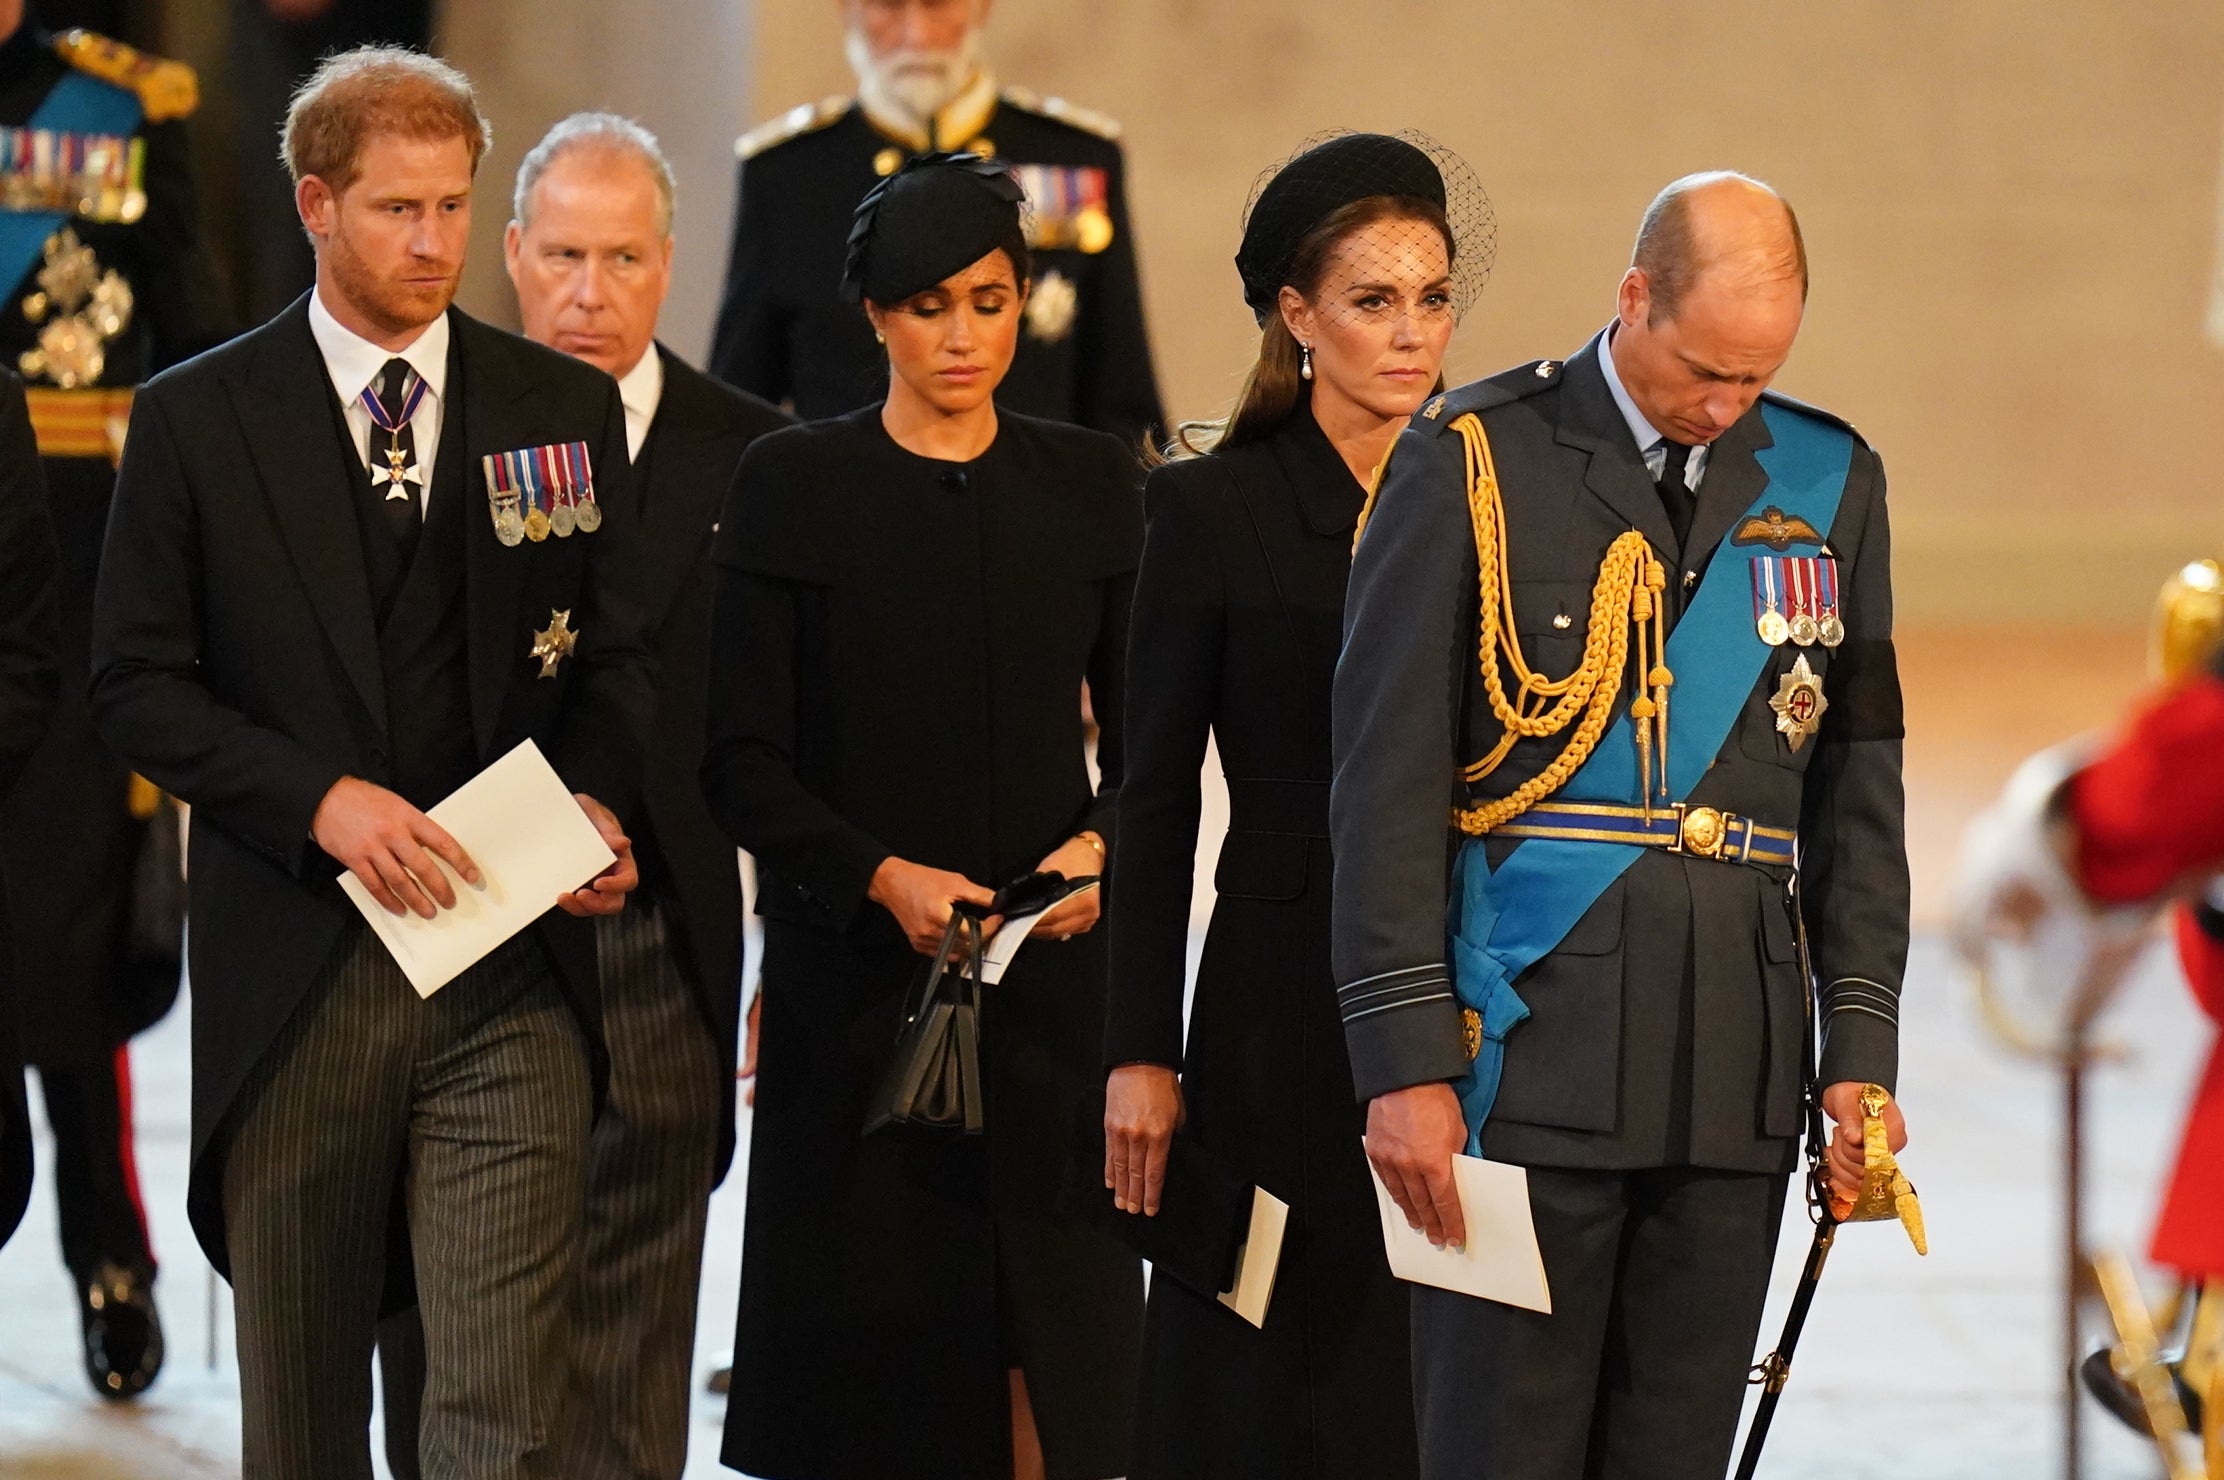 Members of the Royal family have been supporting each other through this tough and busy time (Jacob King/PA)